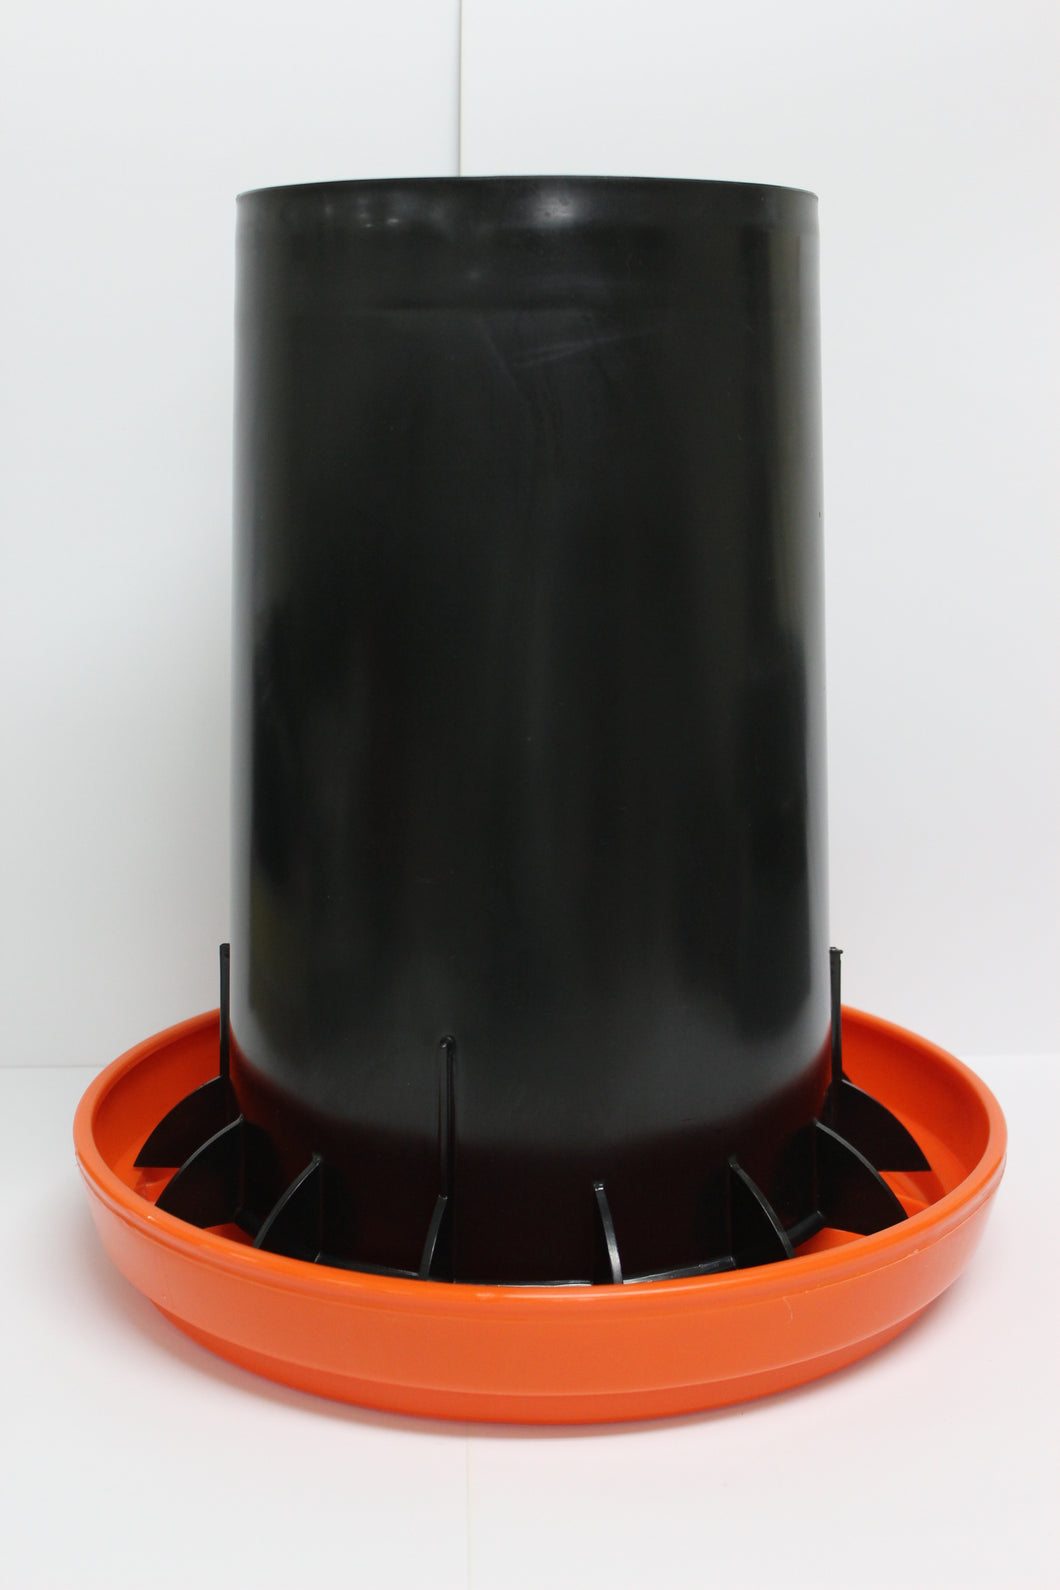 Poultry Feeder Pan